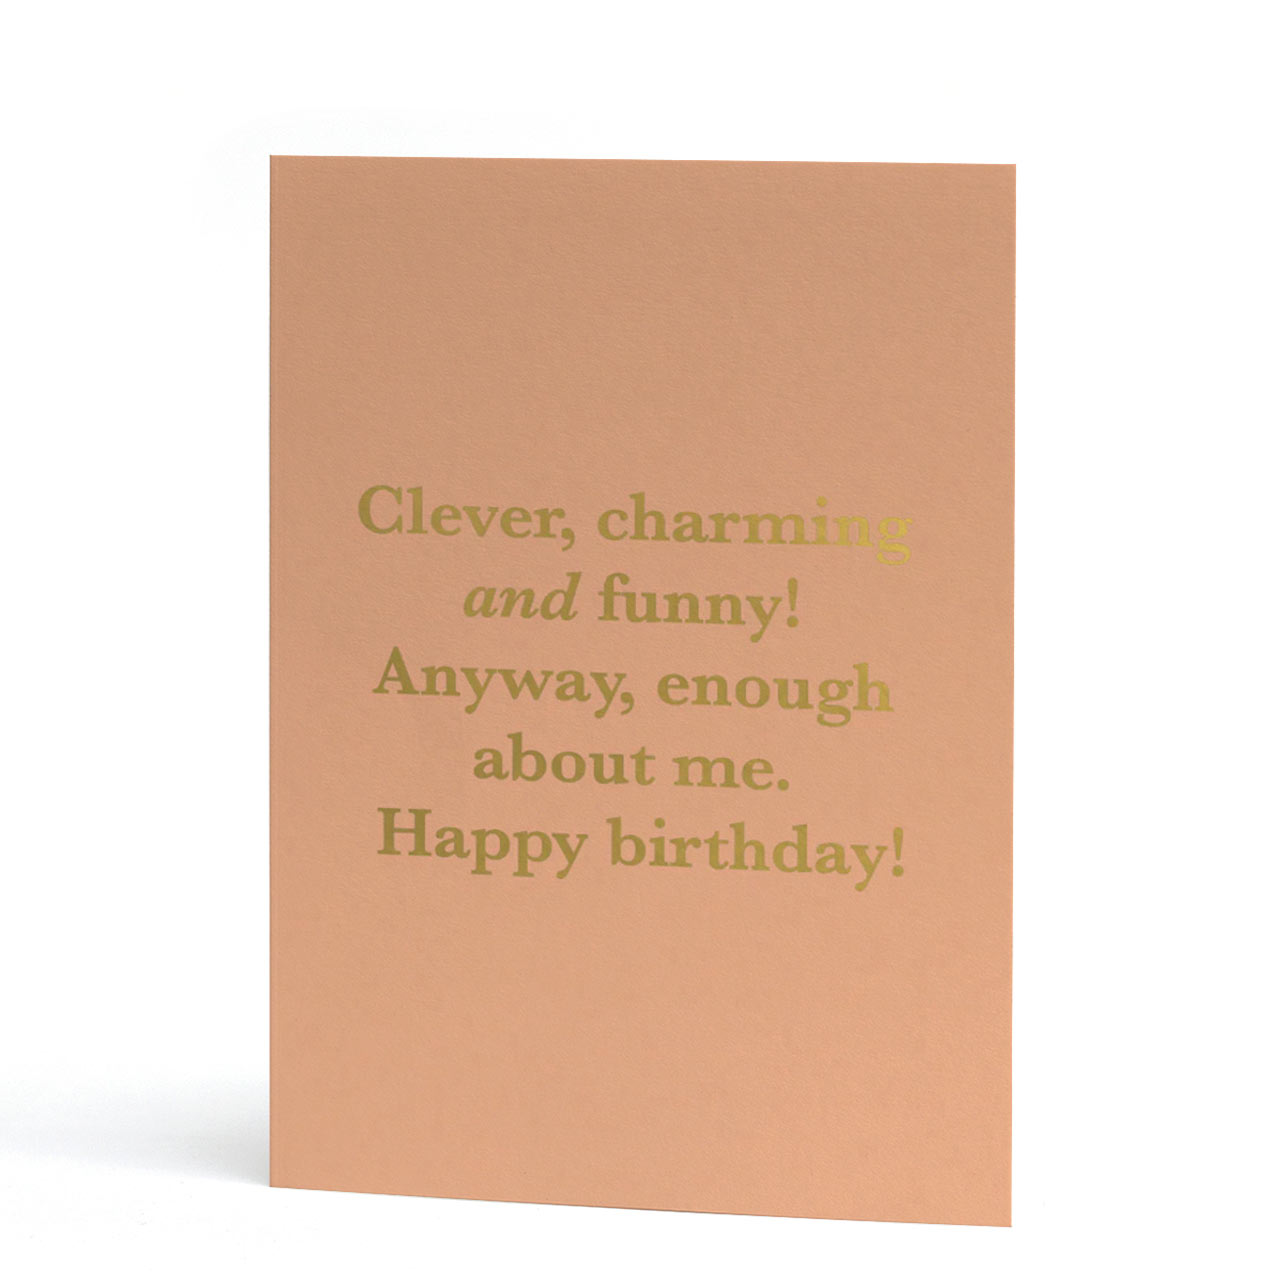 Clever, Charming and Funny Gold Foil Birthday Card